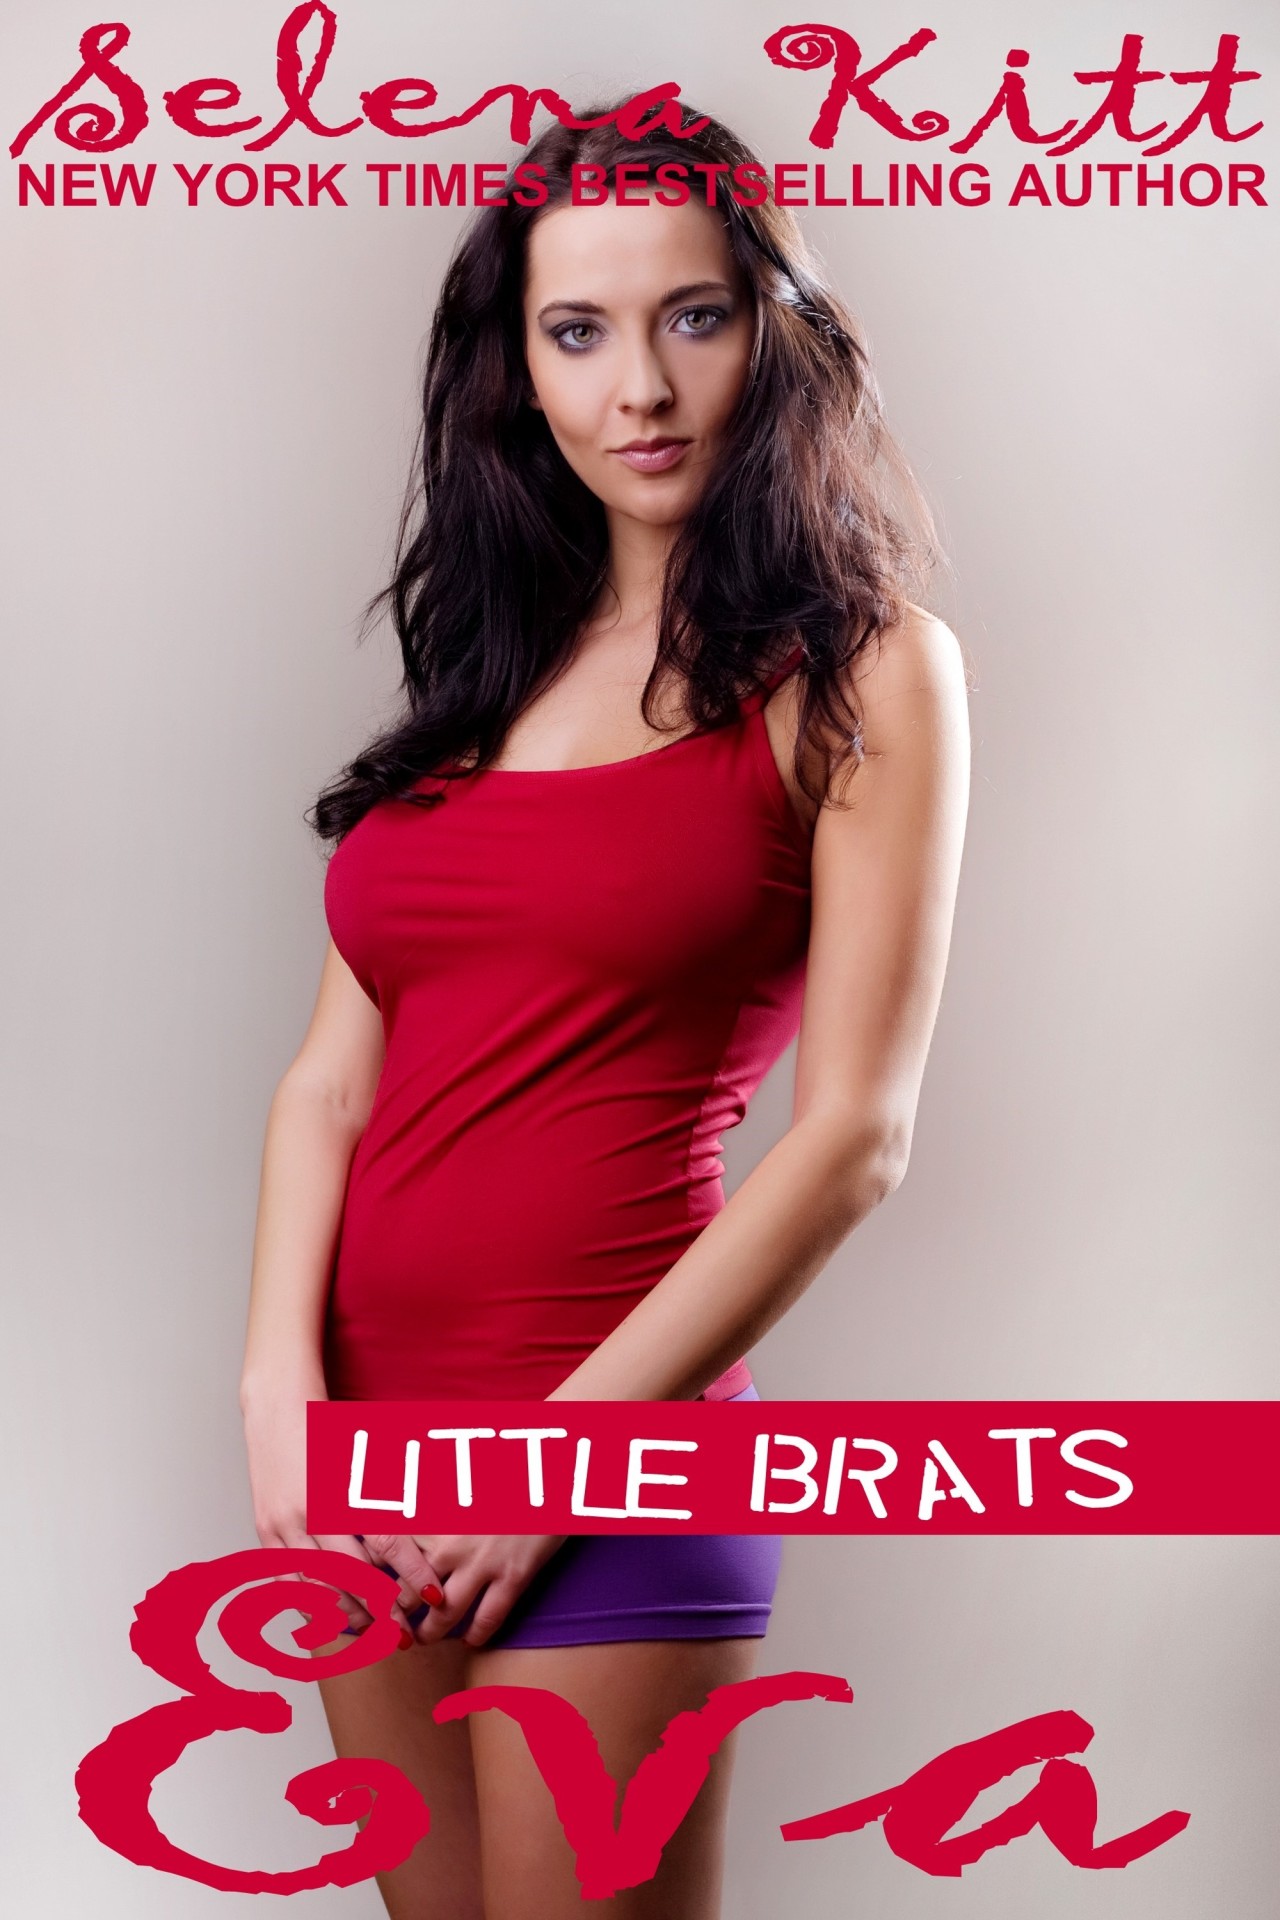 LITTLE BRATS: EVA by Selena KittFREE for Kindle UnlimitedEva doesn’t fit in at